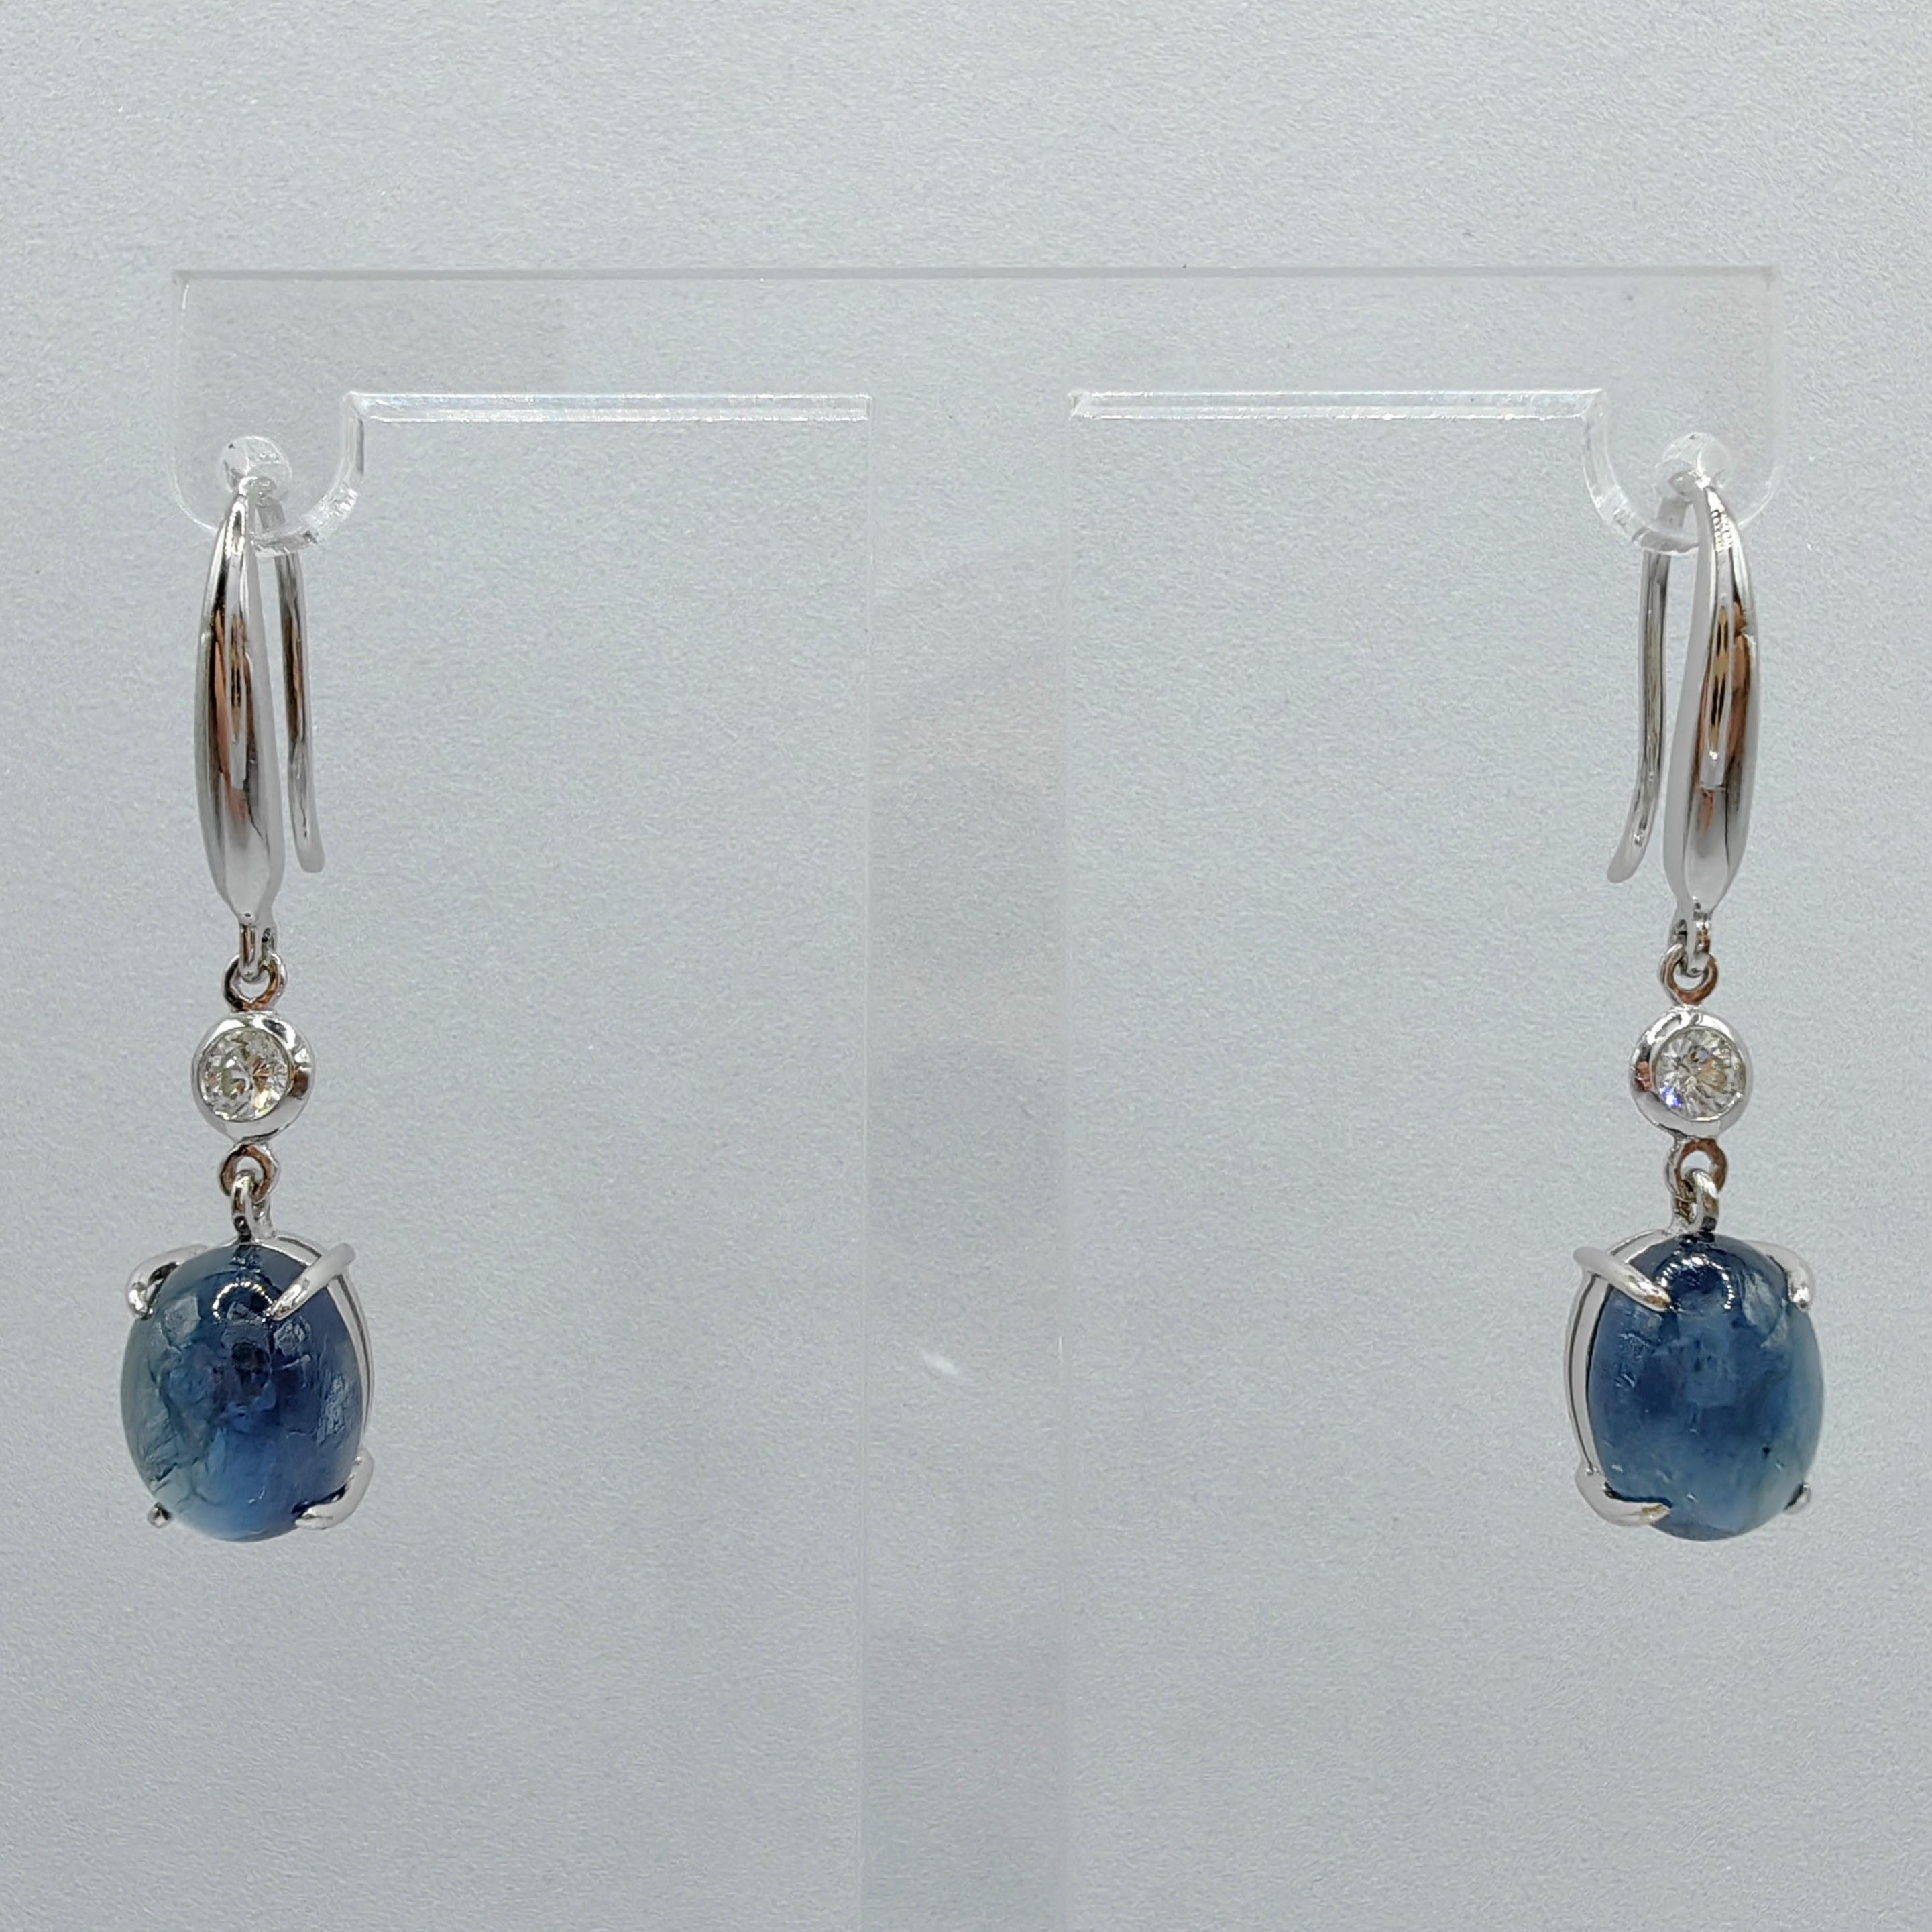 Introducing our exquisite 6.94ct Cabochon Blue Sapphire Diamond Dangling Earrings, where the captivating beauty of blue sapphires and brilliant diamonds takes center stage. 

At the heart of these earrings are two mesmerizing cabochon blue